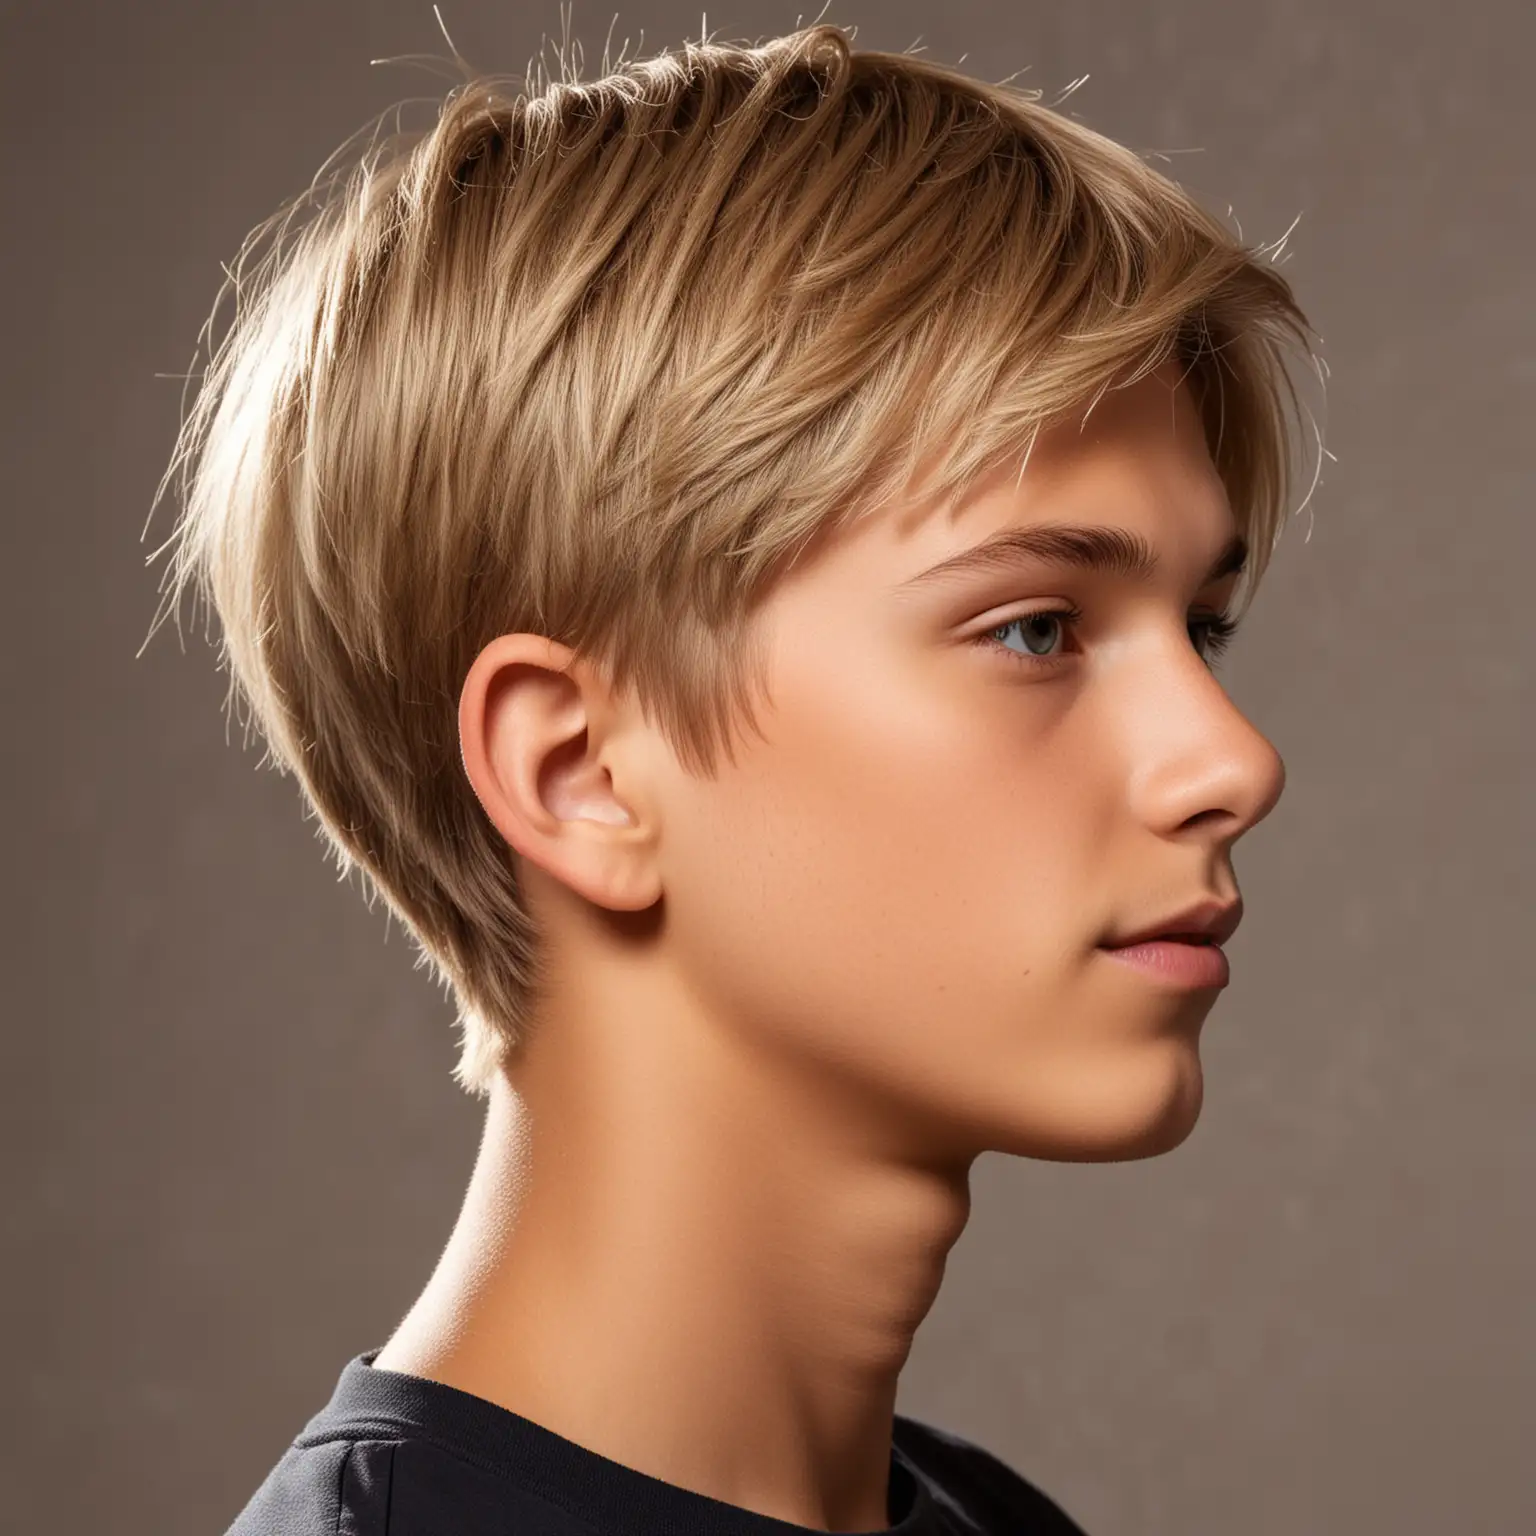 Profile Portrait of a Blonde Teenage Boy with Sunlit Highlights